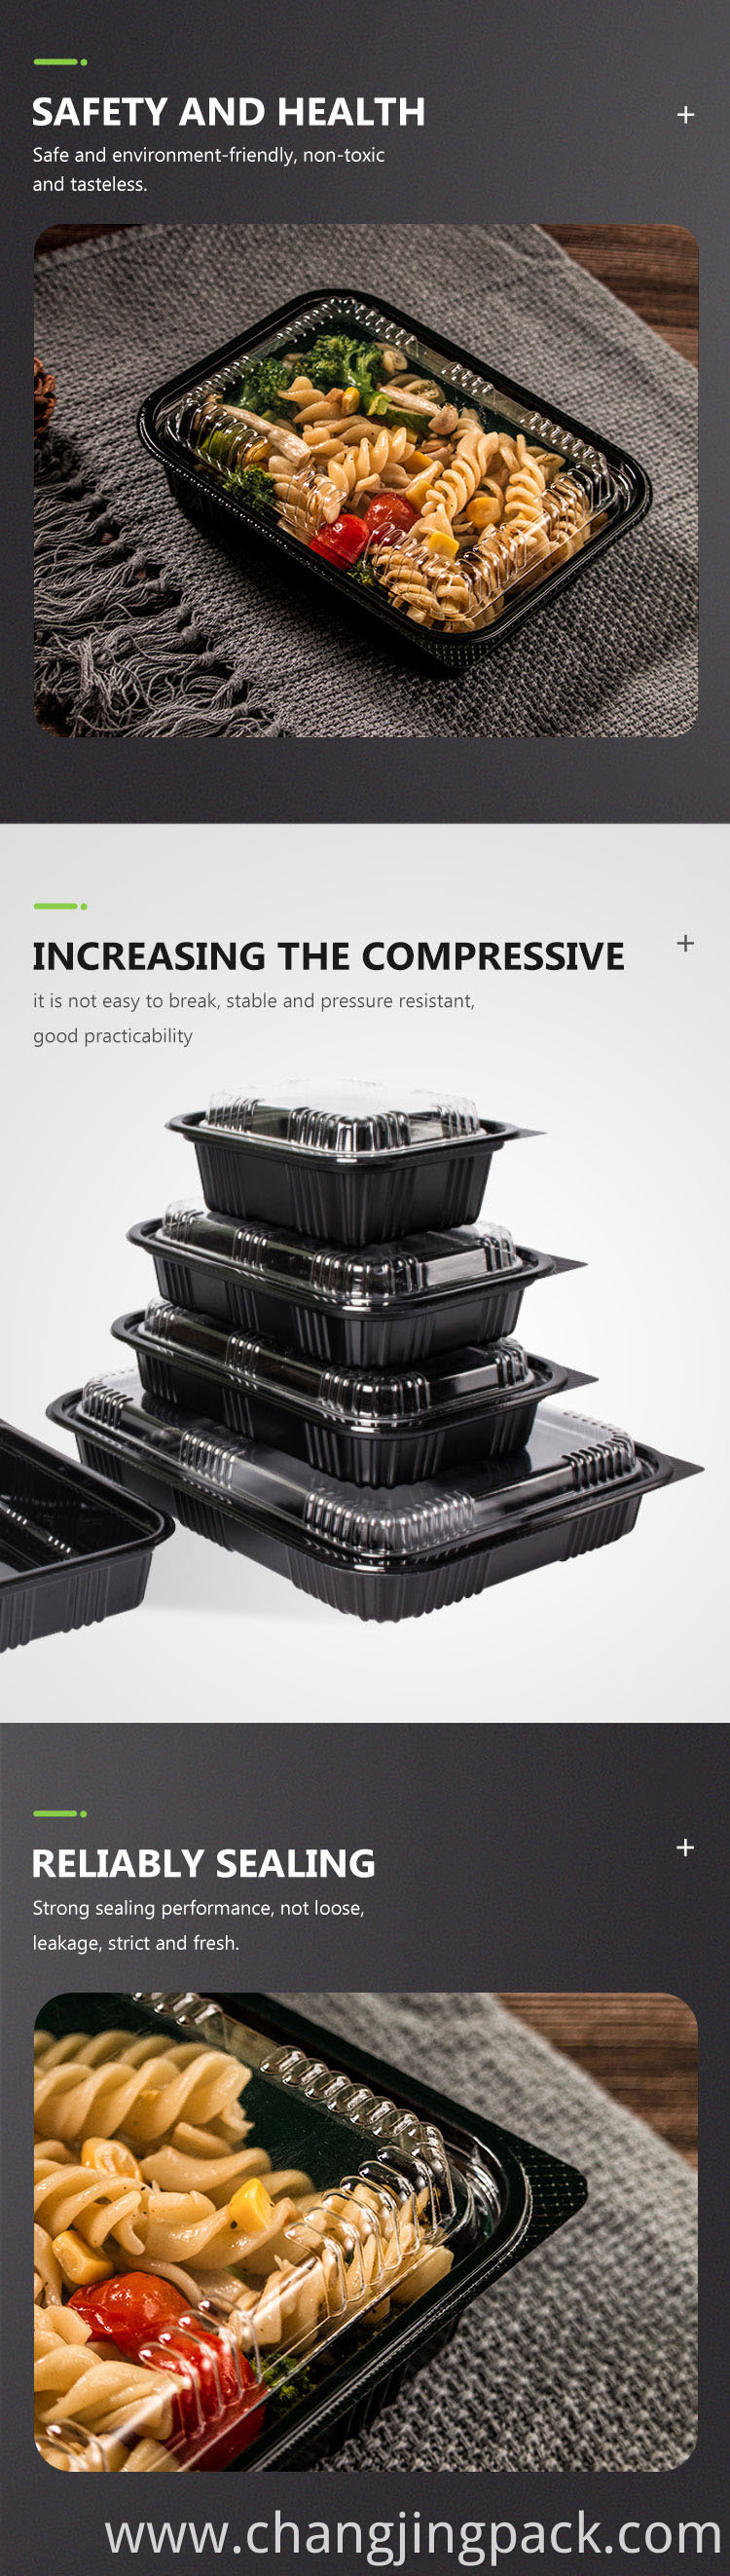 SNAP-ON LIDS FOR ADDED FRESHNESS: These take out sushi trays are equipped with tight-fitting, snap-on lids to make sure your food stays fresh. Great for storing and serving prepared sushi rolls